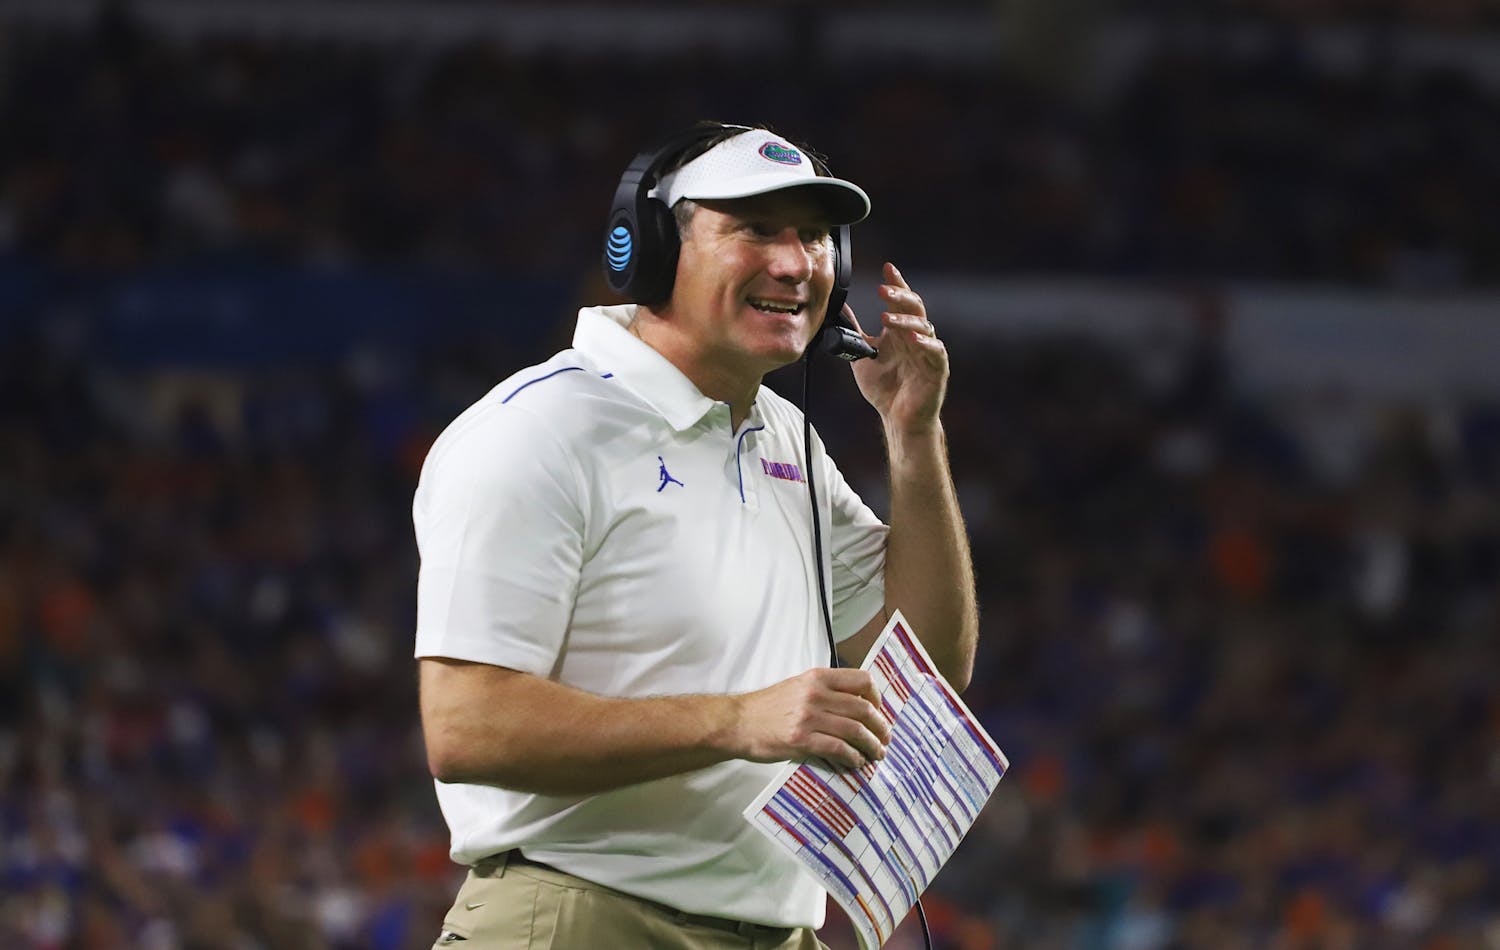 Florida head coach Dan Mullen and several players spoke to media ahead of 2021 fall football camps on Thursday.